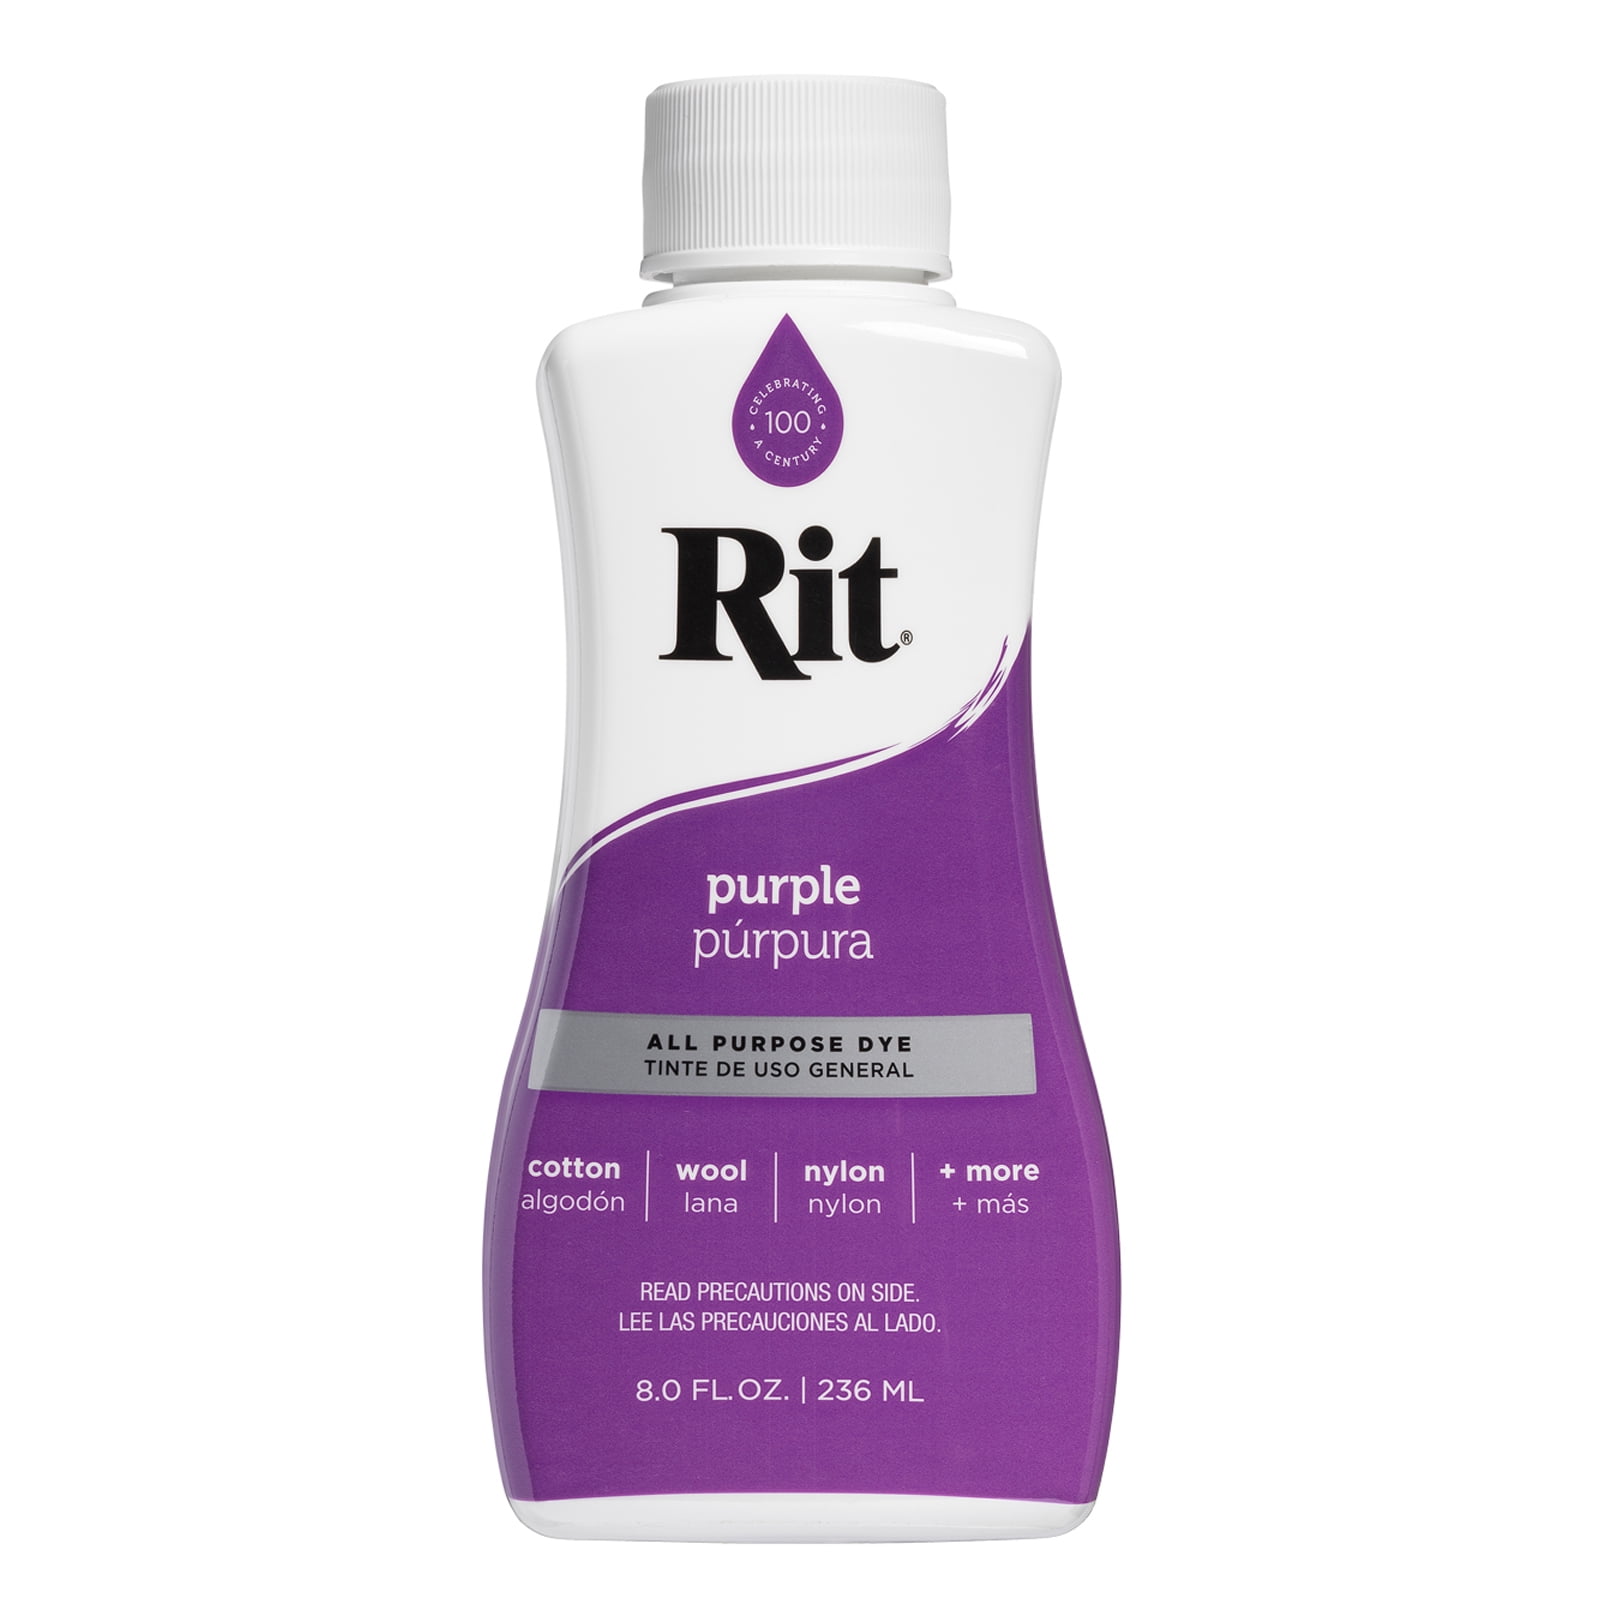  Rit Dye Multi-Purpose Liquid 8 OZ., Great for Clothing,  Accessories, Décor, and Much More